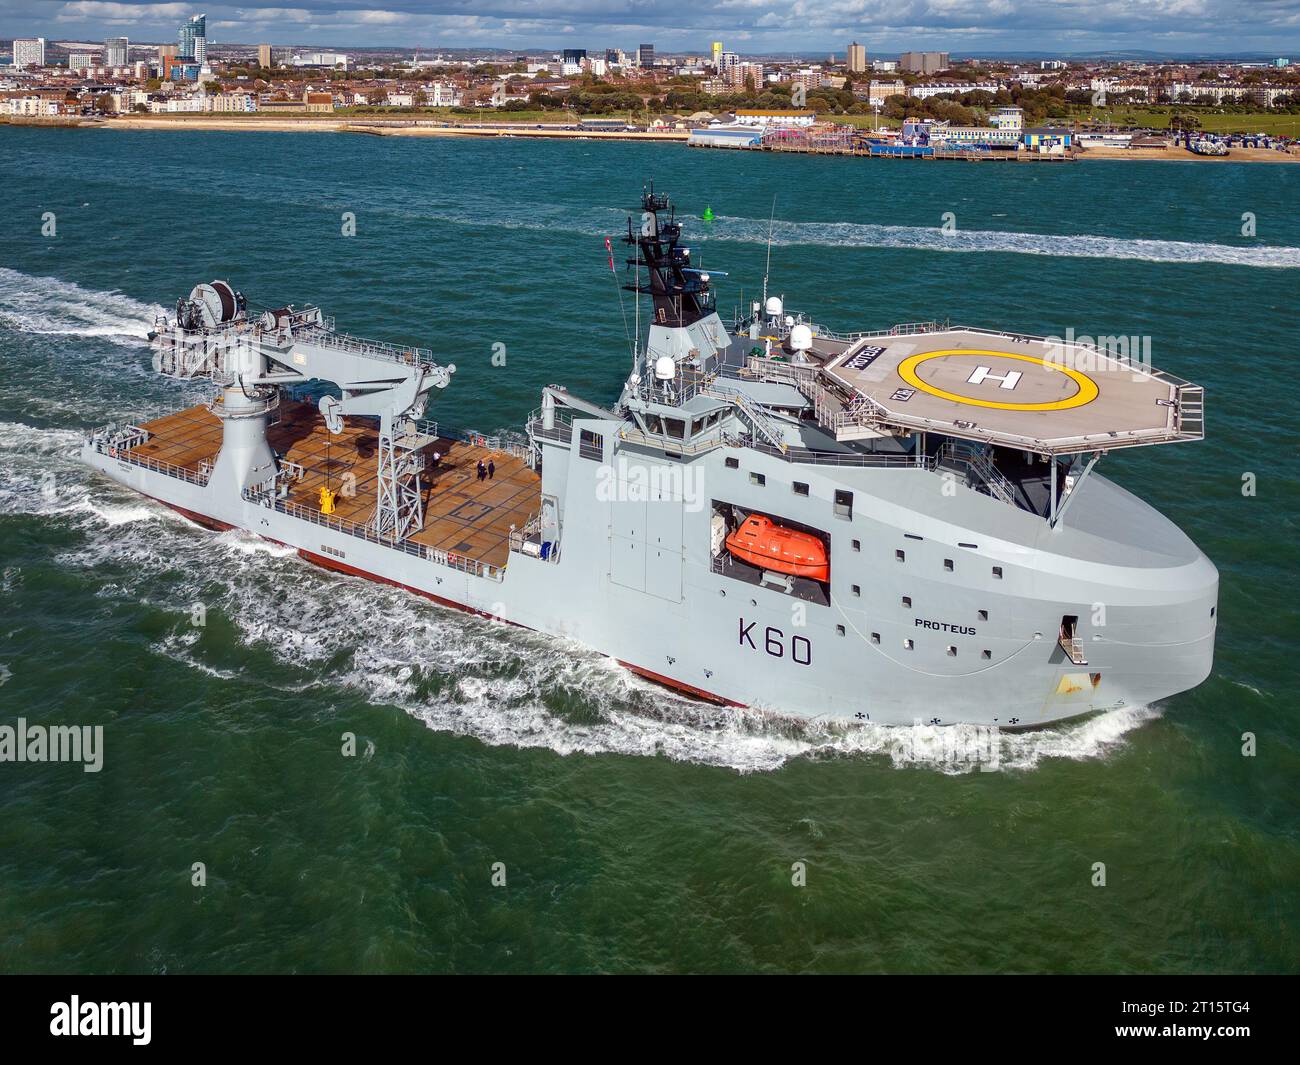 RFA Proteus (K60) is a Multi-Role Ocean Surveillance Ship tasked with protecting the UK's subsea cable and pipeline infrastructure. Stock Photo